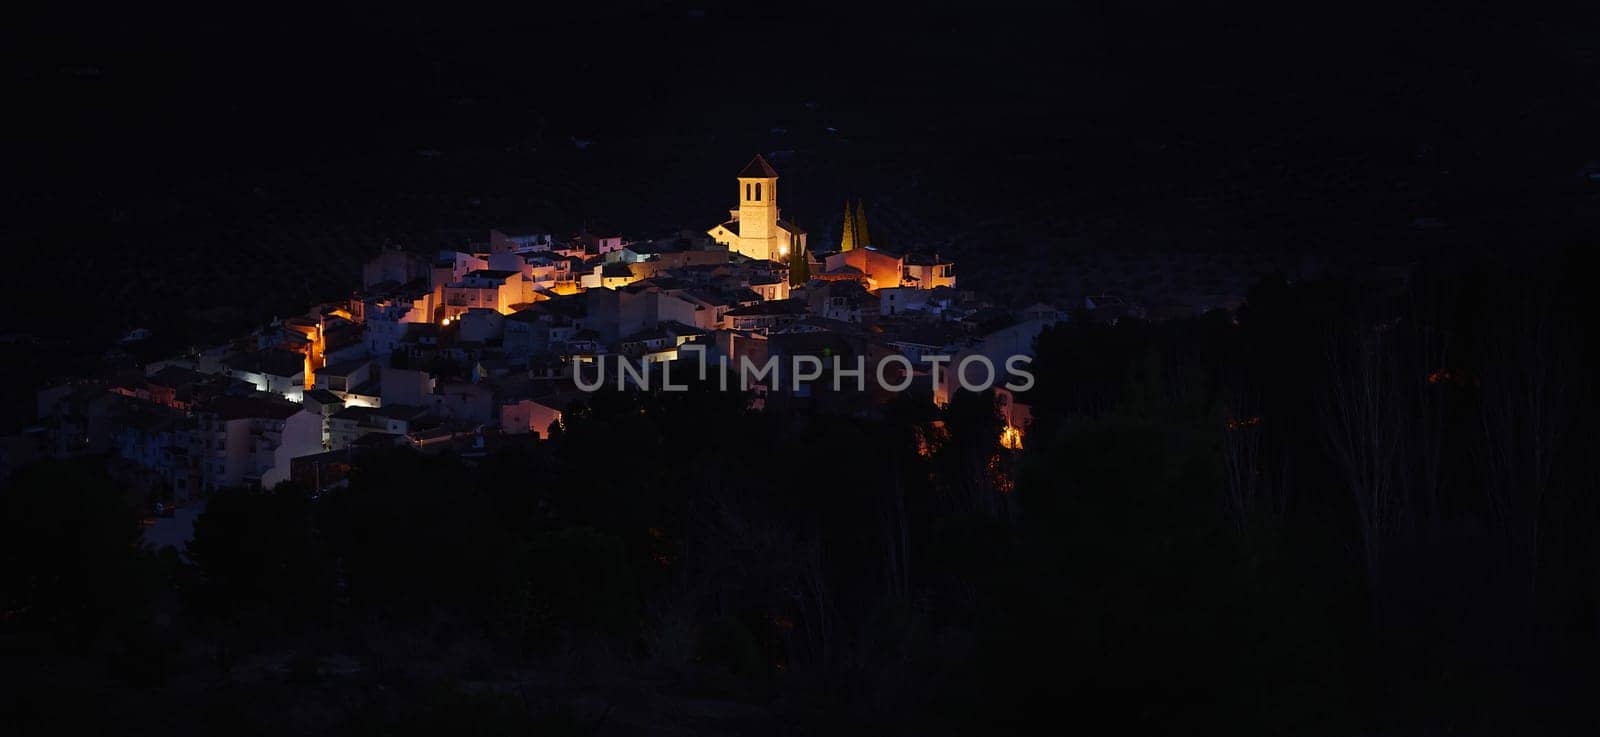 View from the hill of medieval historical city of Quesada in province of Jaen, with illuminated bell tower and while houses in the night time. Andalusia. Spain. Beauty in nature. Travel and tourism by artgf